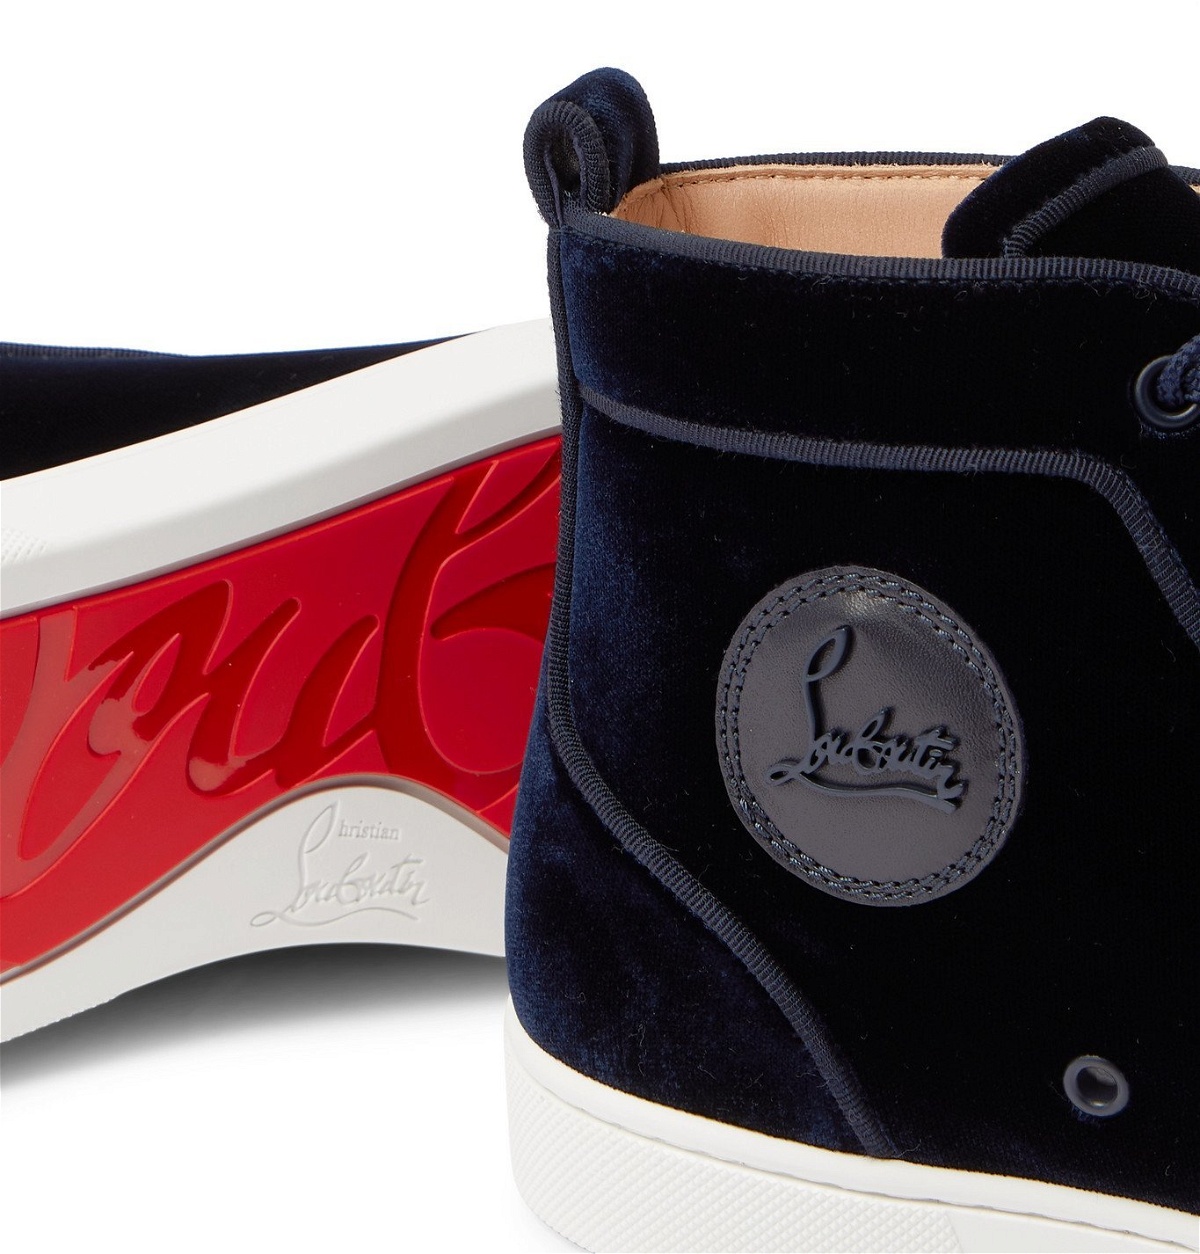 CHRISTIAN LOUBOUTIN - Louis Leather-Trimmed Velvet High-Top Sneakers - Blue  Christian Louboutin